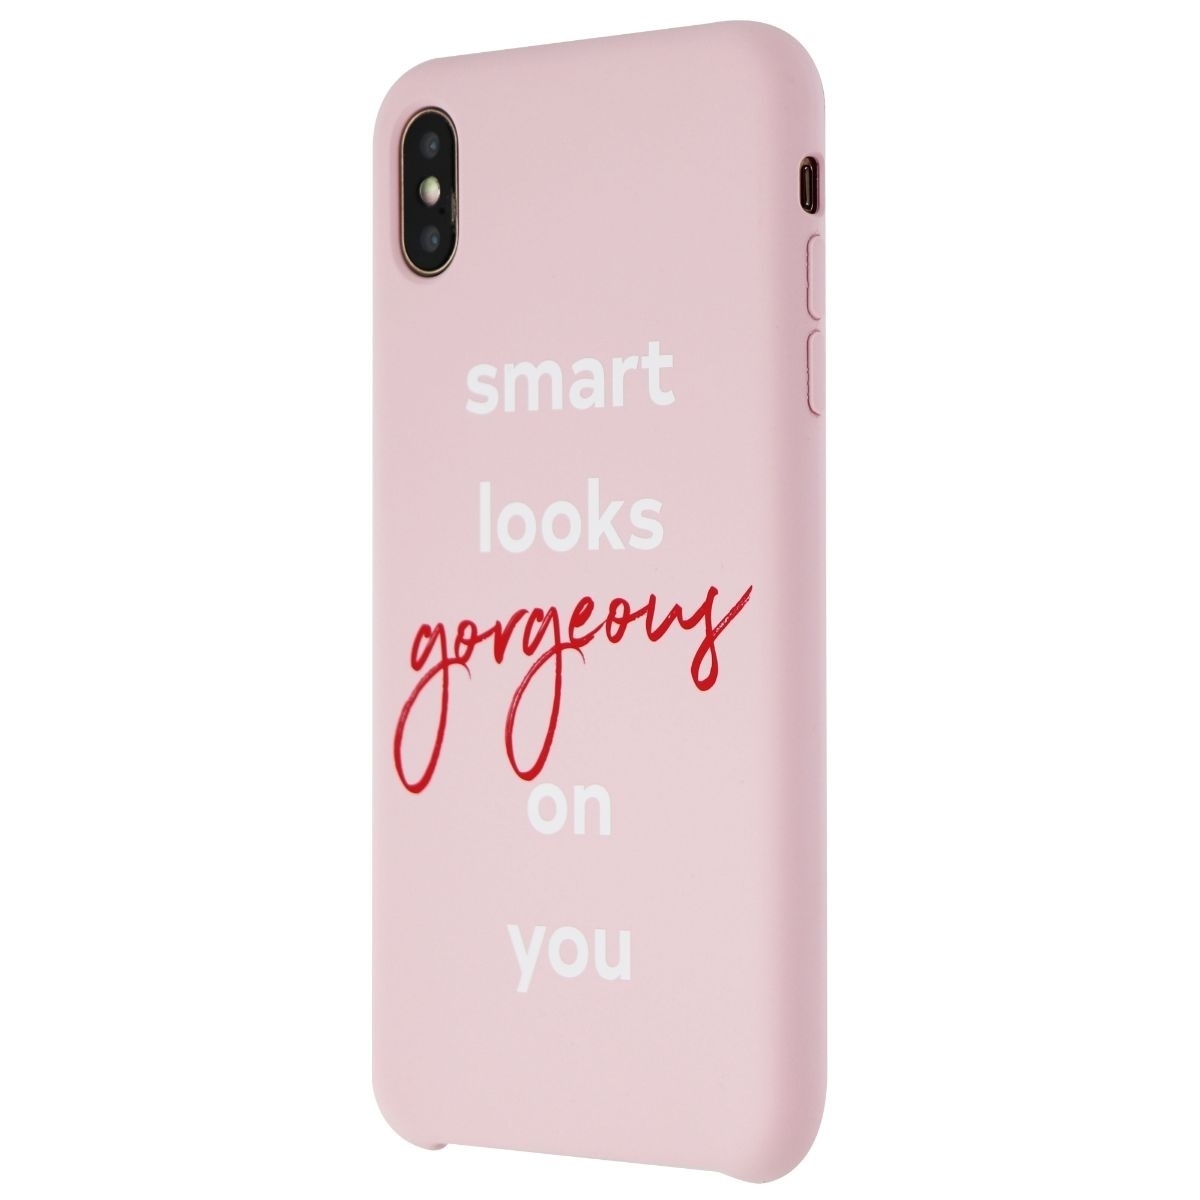 My Social Canvas Smart Looks Gorgeous Case For IPhone XS Max - Pink